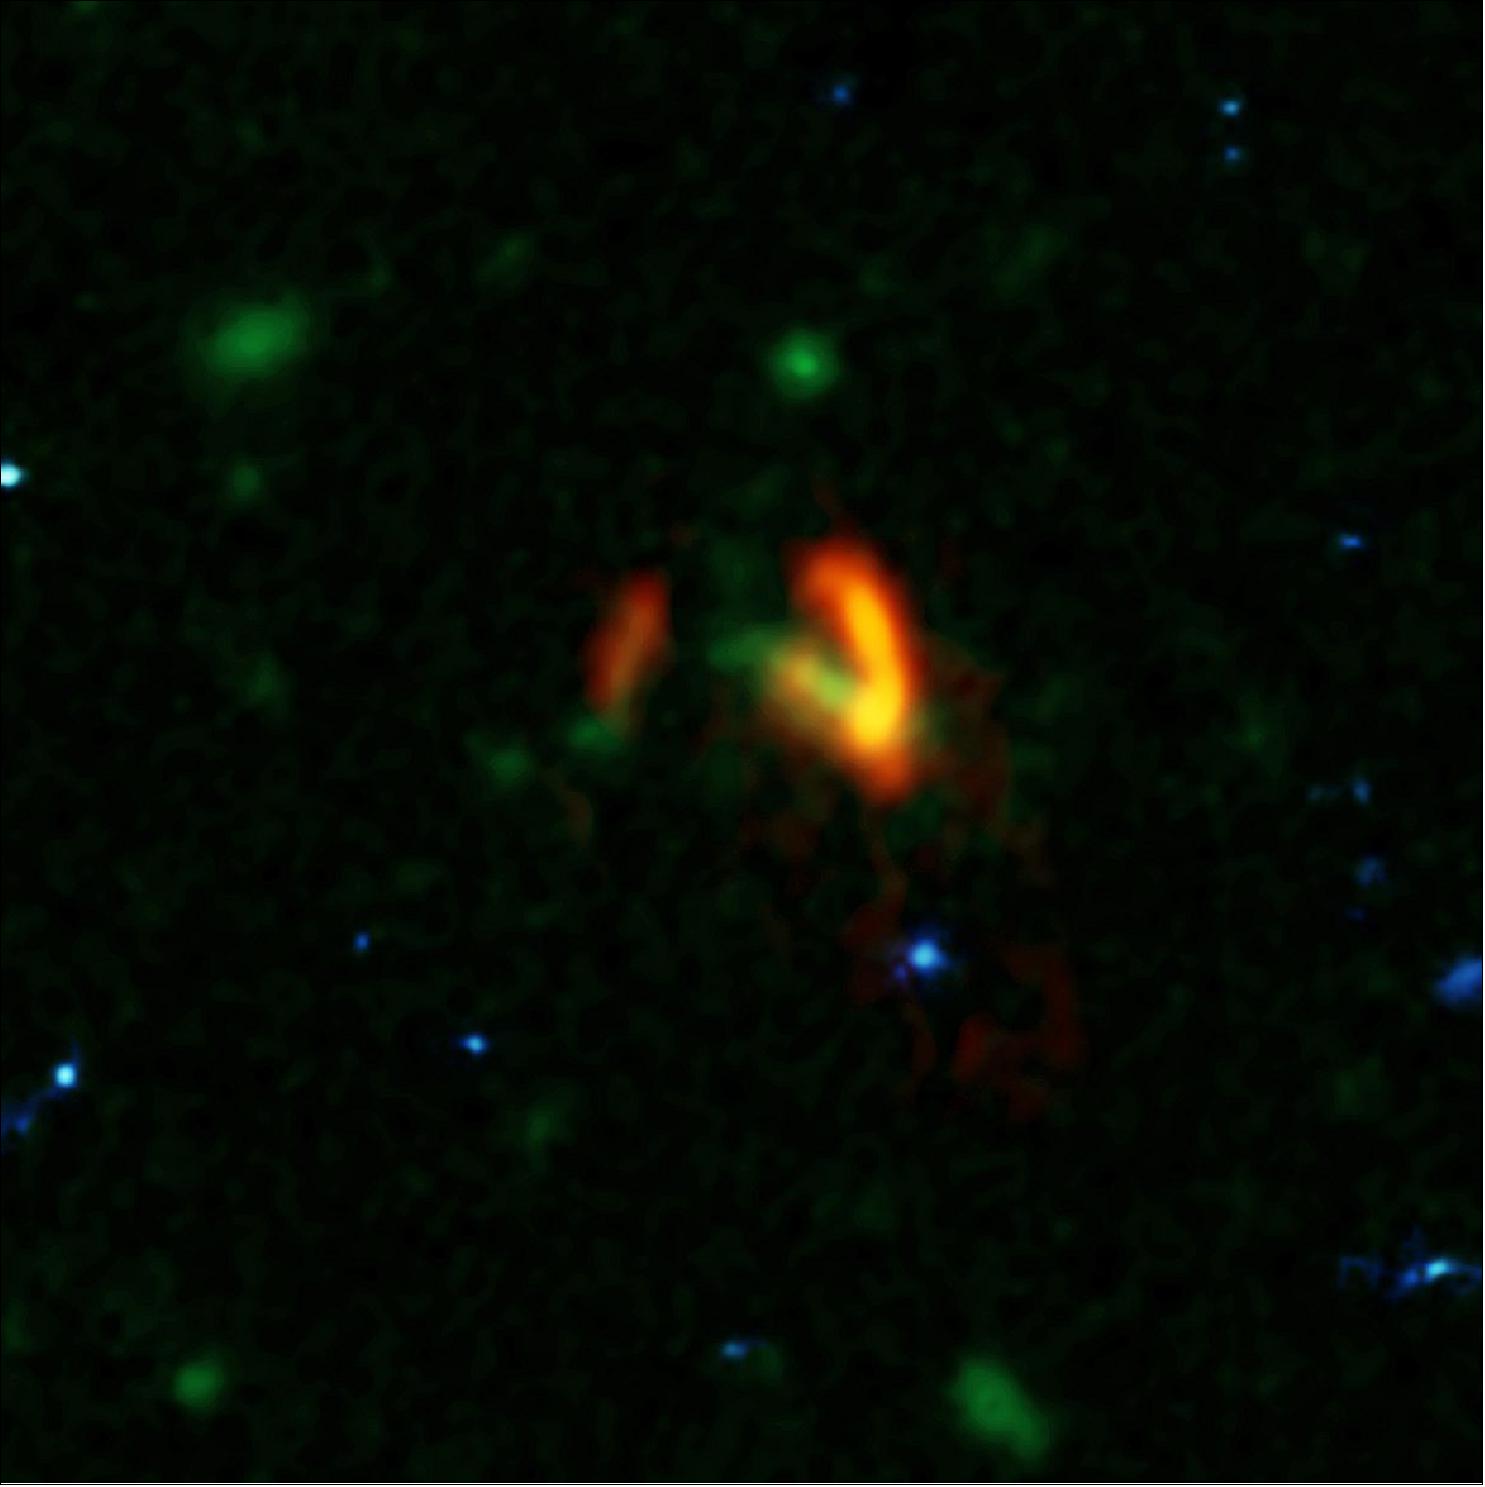 Figure 64: A composite image showing ALMA data (red) of the two galaxies of SPT0311-58. These galaxies are shown over a background from the Hubble Space Telescope (blue and green). The ALMA data show the two galaxies' dusty glow. The image of the galaxy on the right is distorted by gravitational lensing. The nearer foreground lensing galaxy is the green object between the two galaxies imaged by ALMA [image credit: ALMA (ESO/NAOJ/NRAO), Marrone, et al.; B. Saxton (NRAO/AUI/NSF); NASA/ESA Hubble]